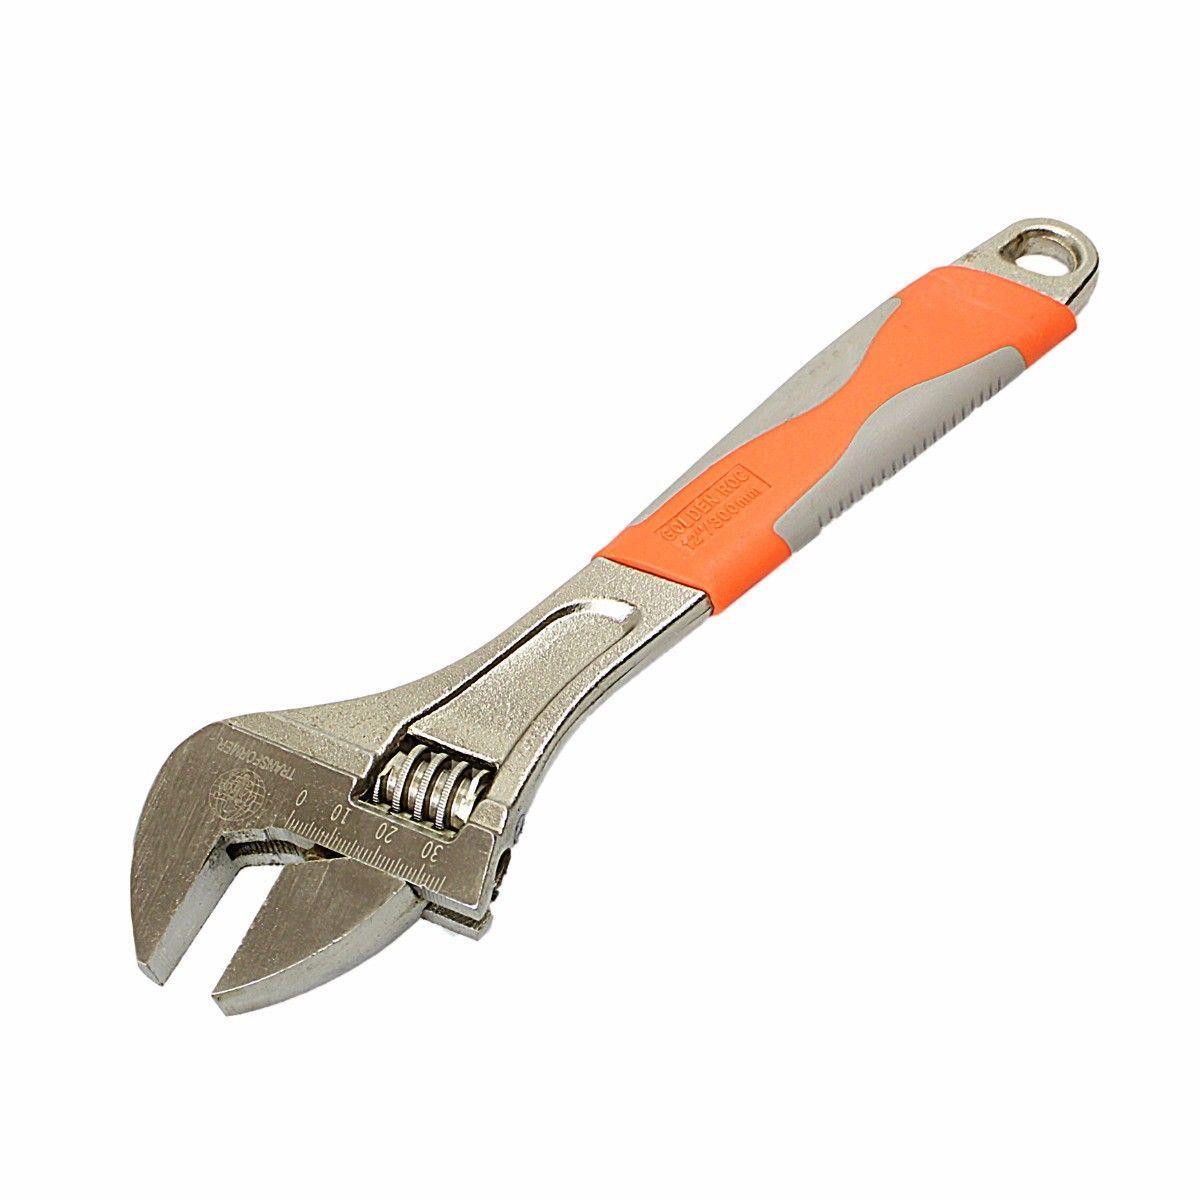 Wrench Tool Heavy Metal Duty Wrench 10'' Multipurpose Use DIY 0777 (Parcel Rate)